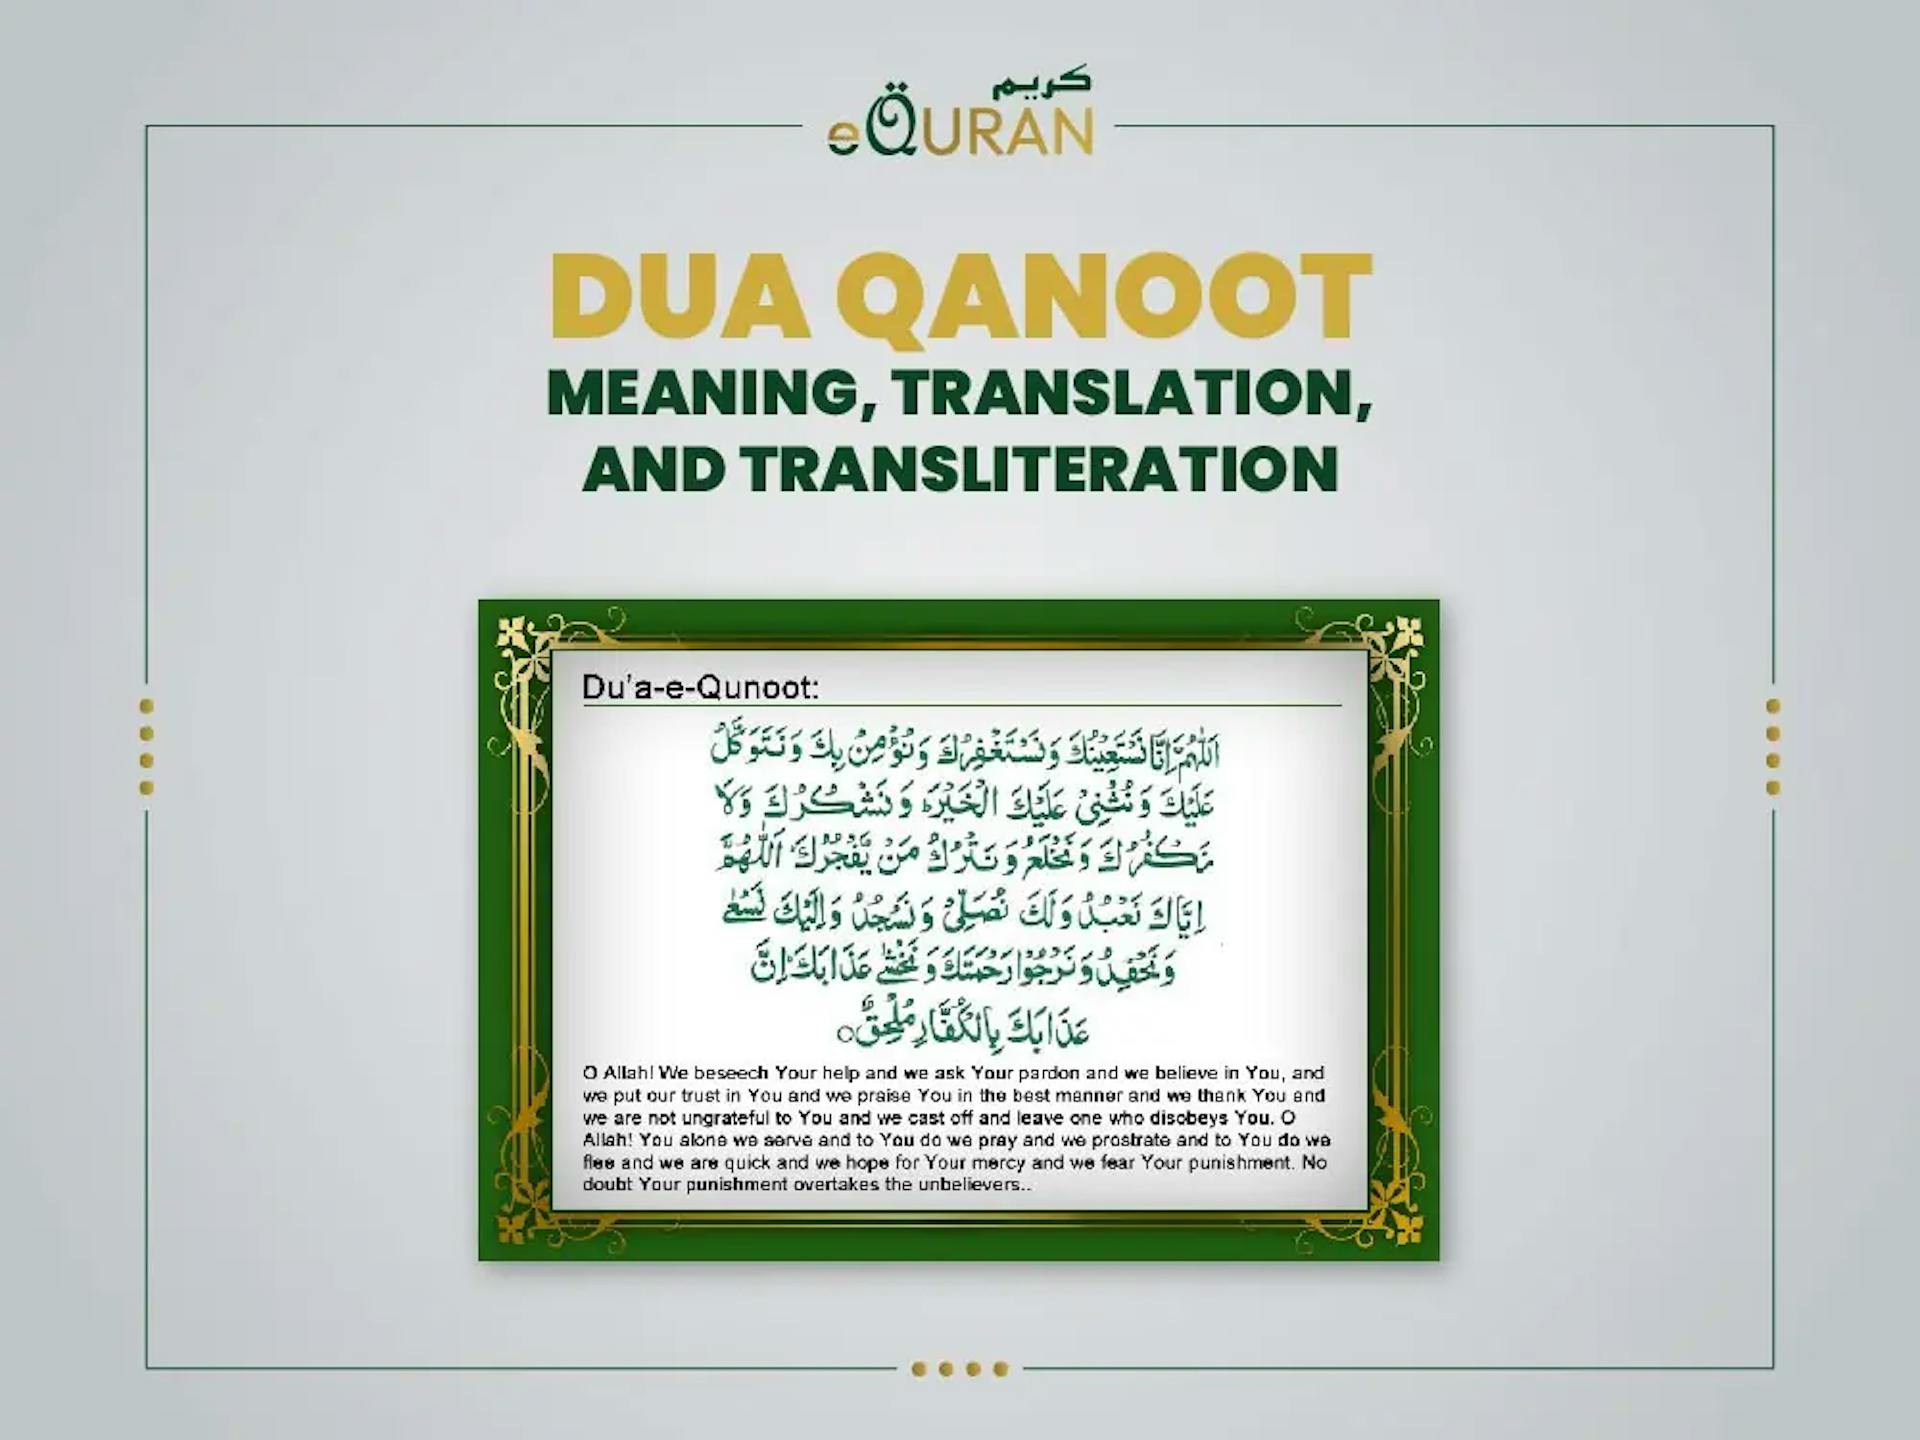 dua qunoot or dua for witr with urdu and english translation.